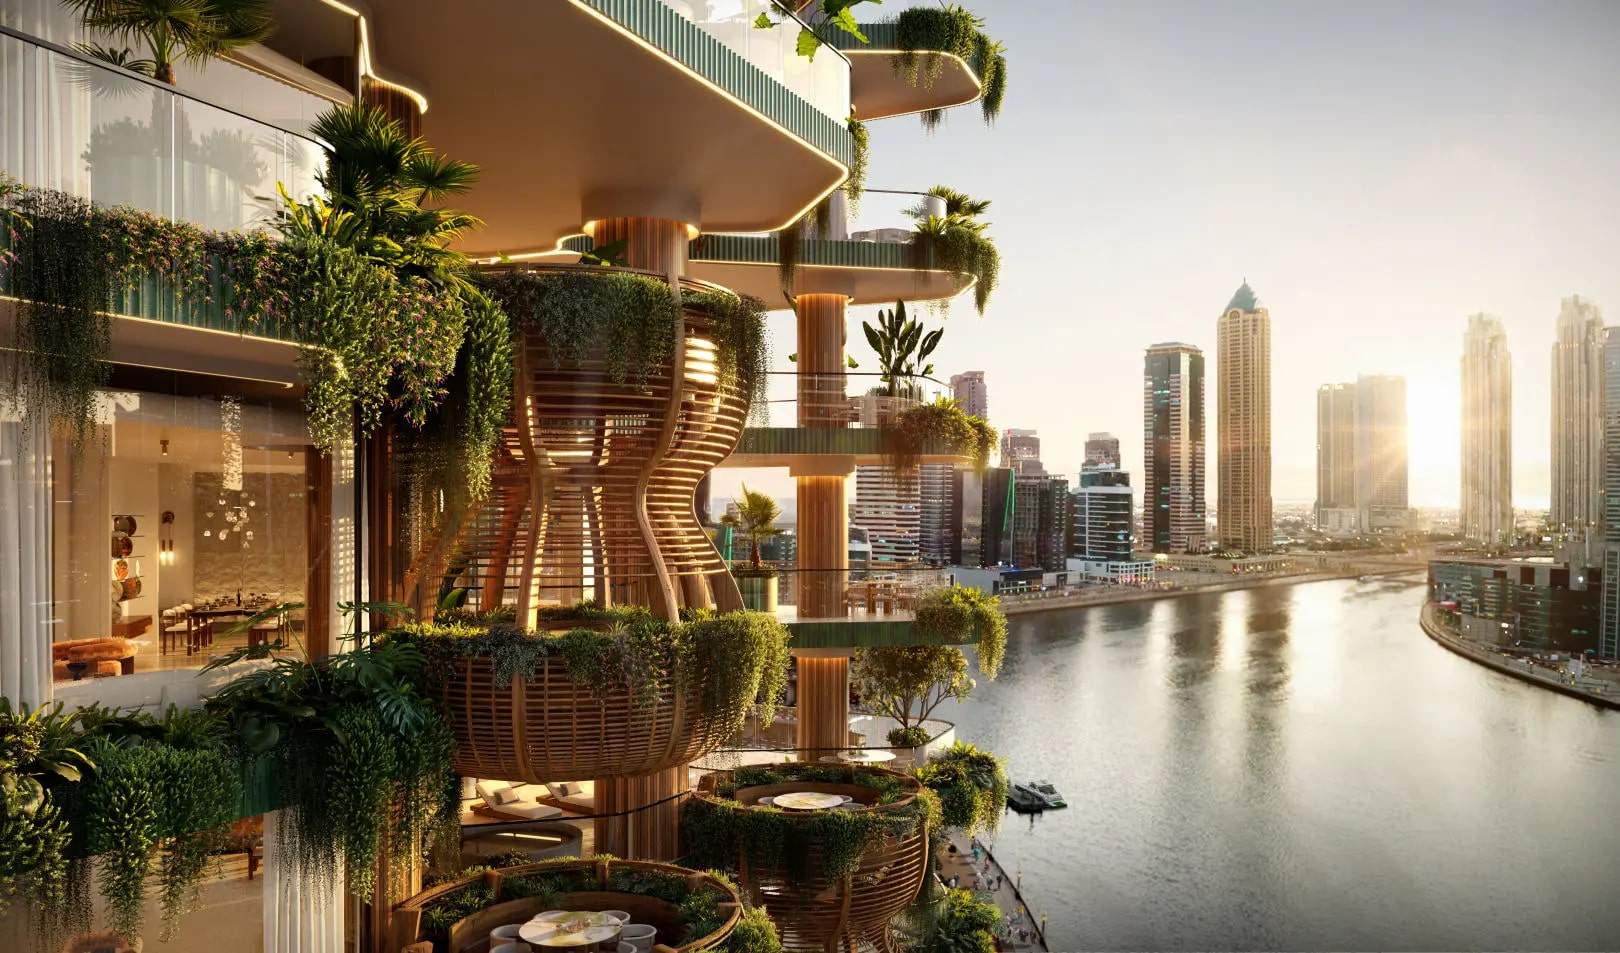 Want to live in Eywa, the opulent new Dubai residential tower inspired by James Cameron’s film Avatar, close to Downtown Dubai. Photo: Eywa Dubai